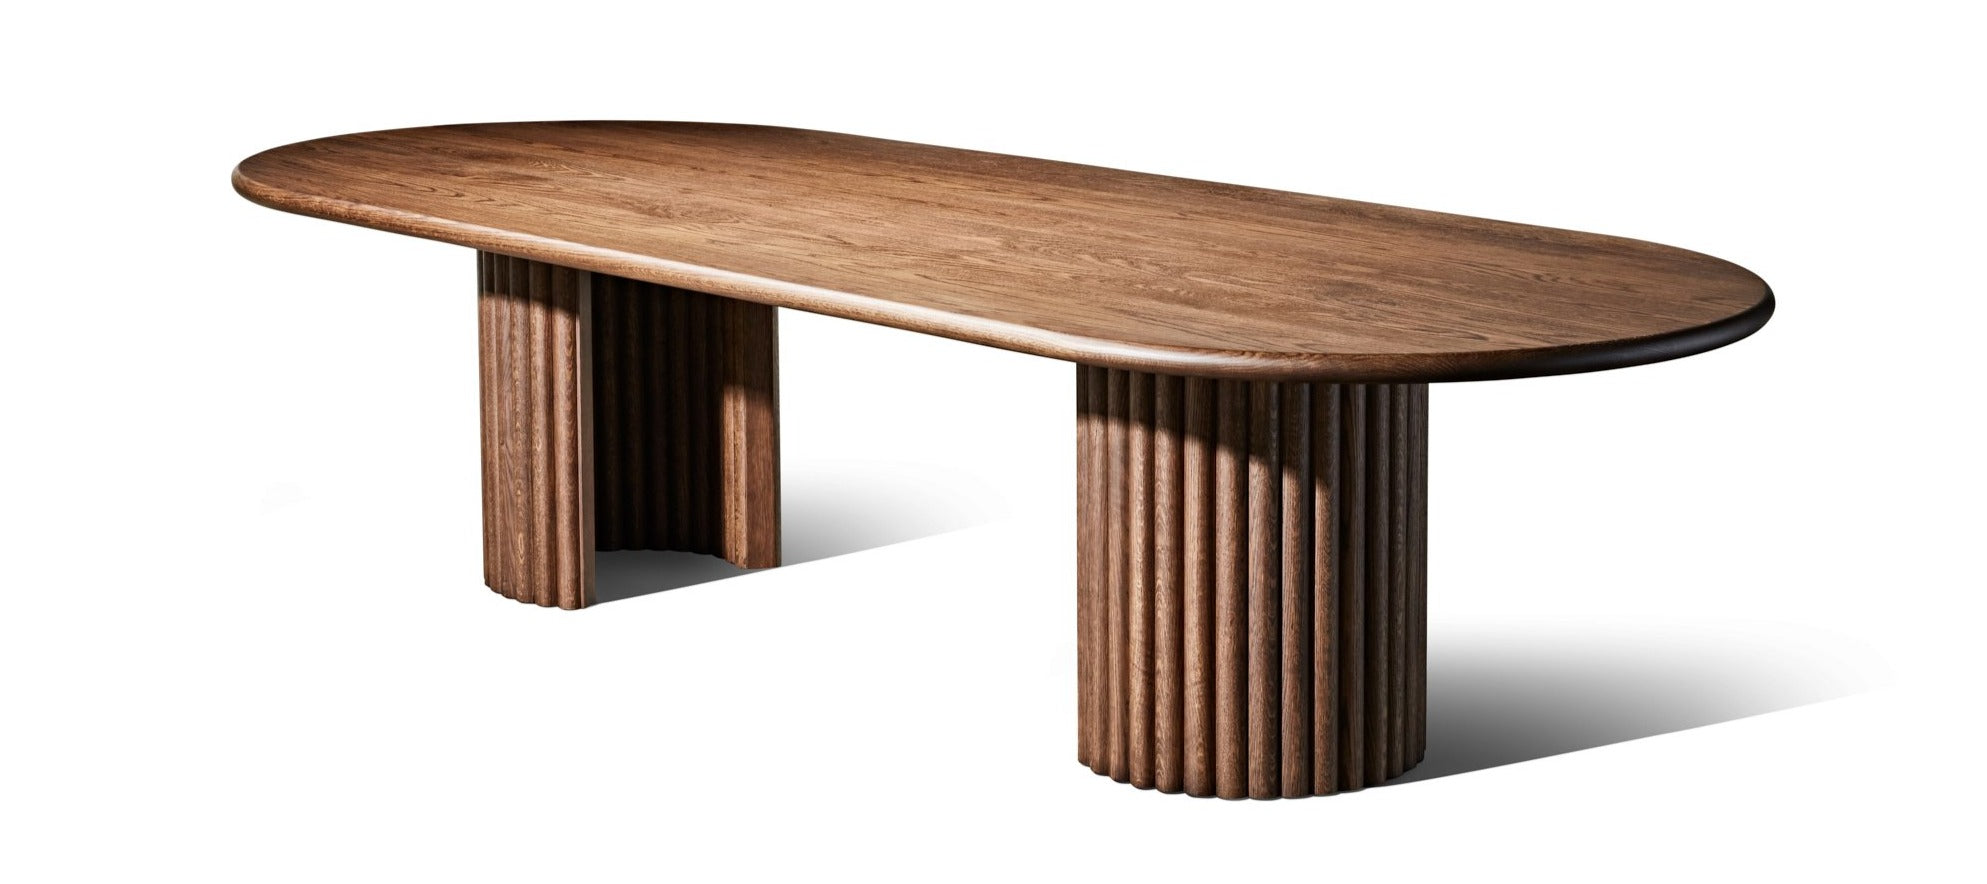 Jewel Scalloped Dining Table - Zuster Furniture